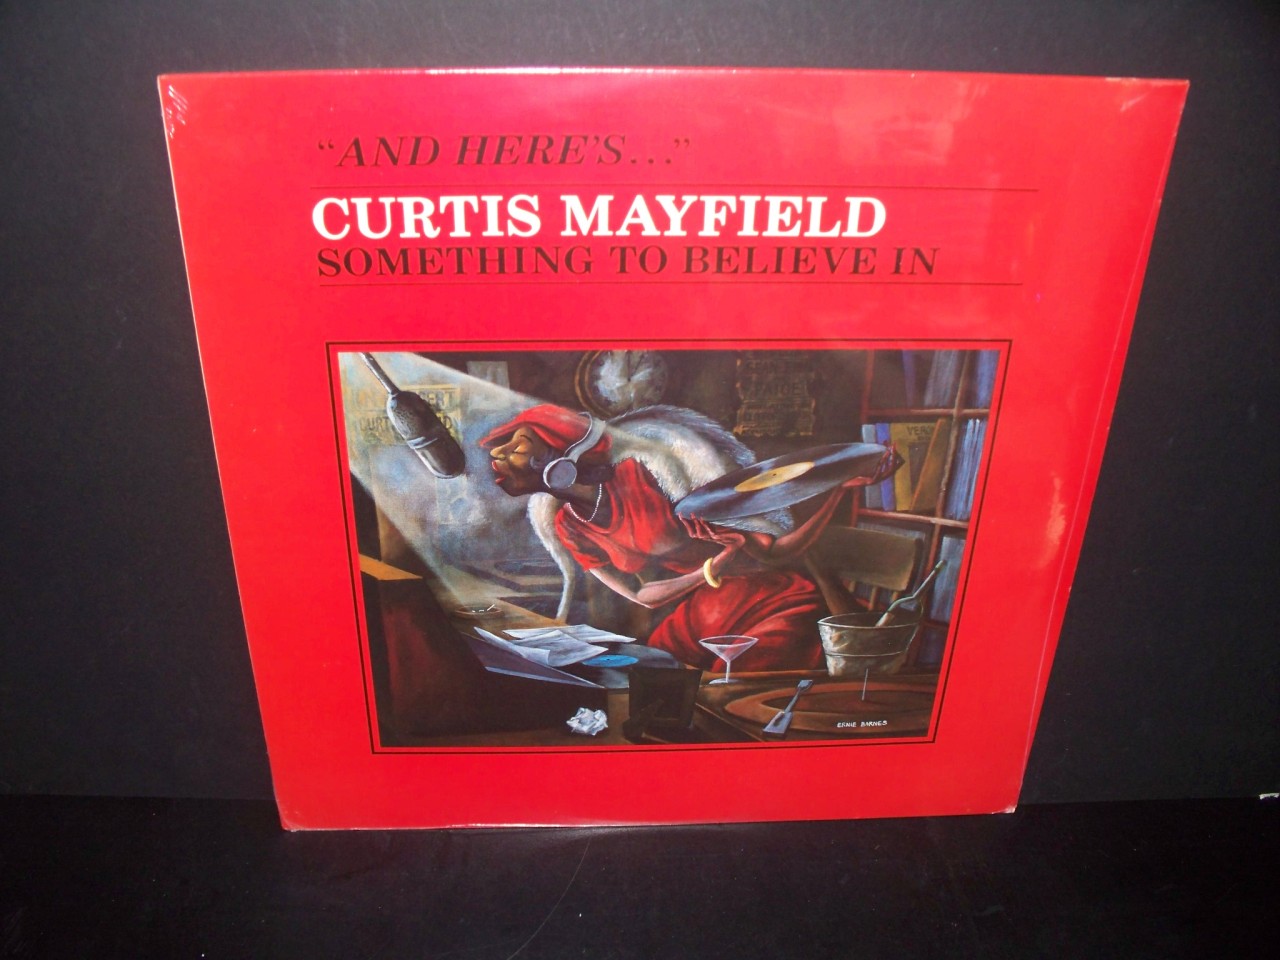 popsike.com - AND HERES CURTIS MAYFIELD SOMETHING TO BELIEVE